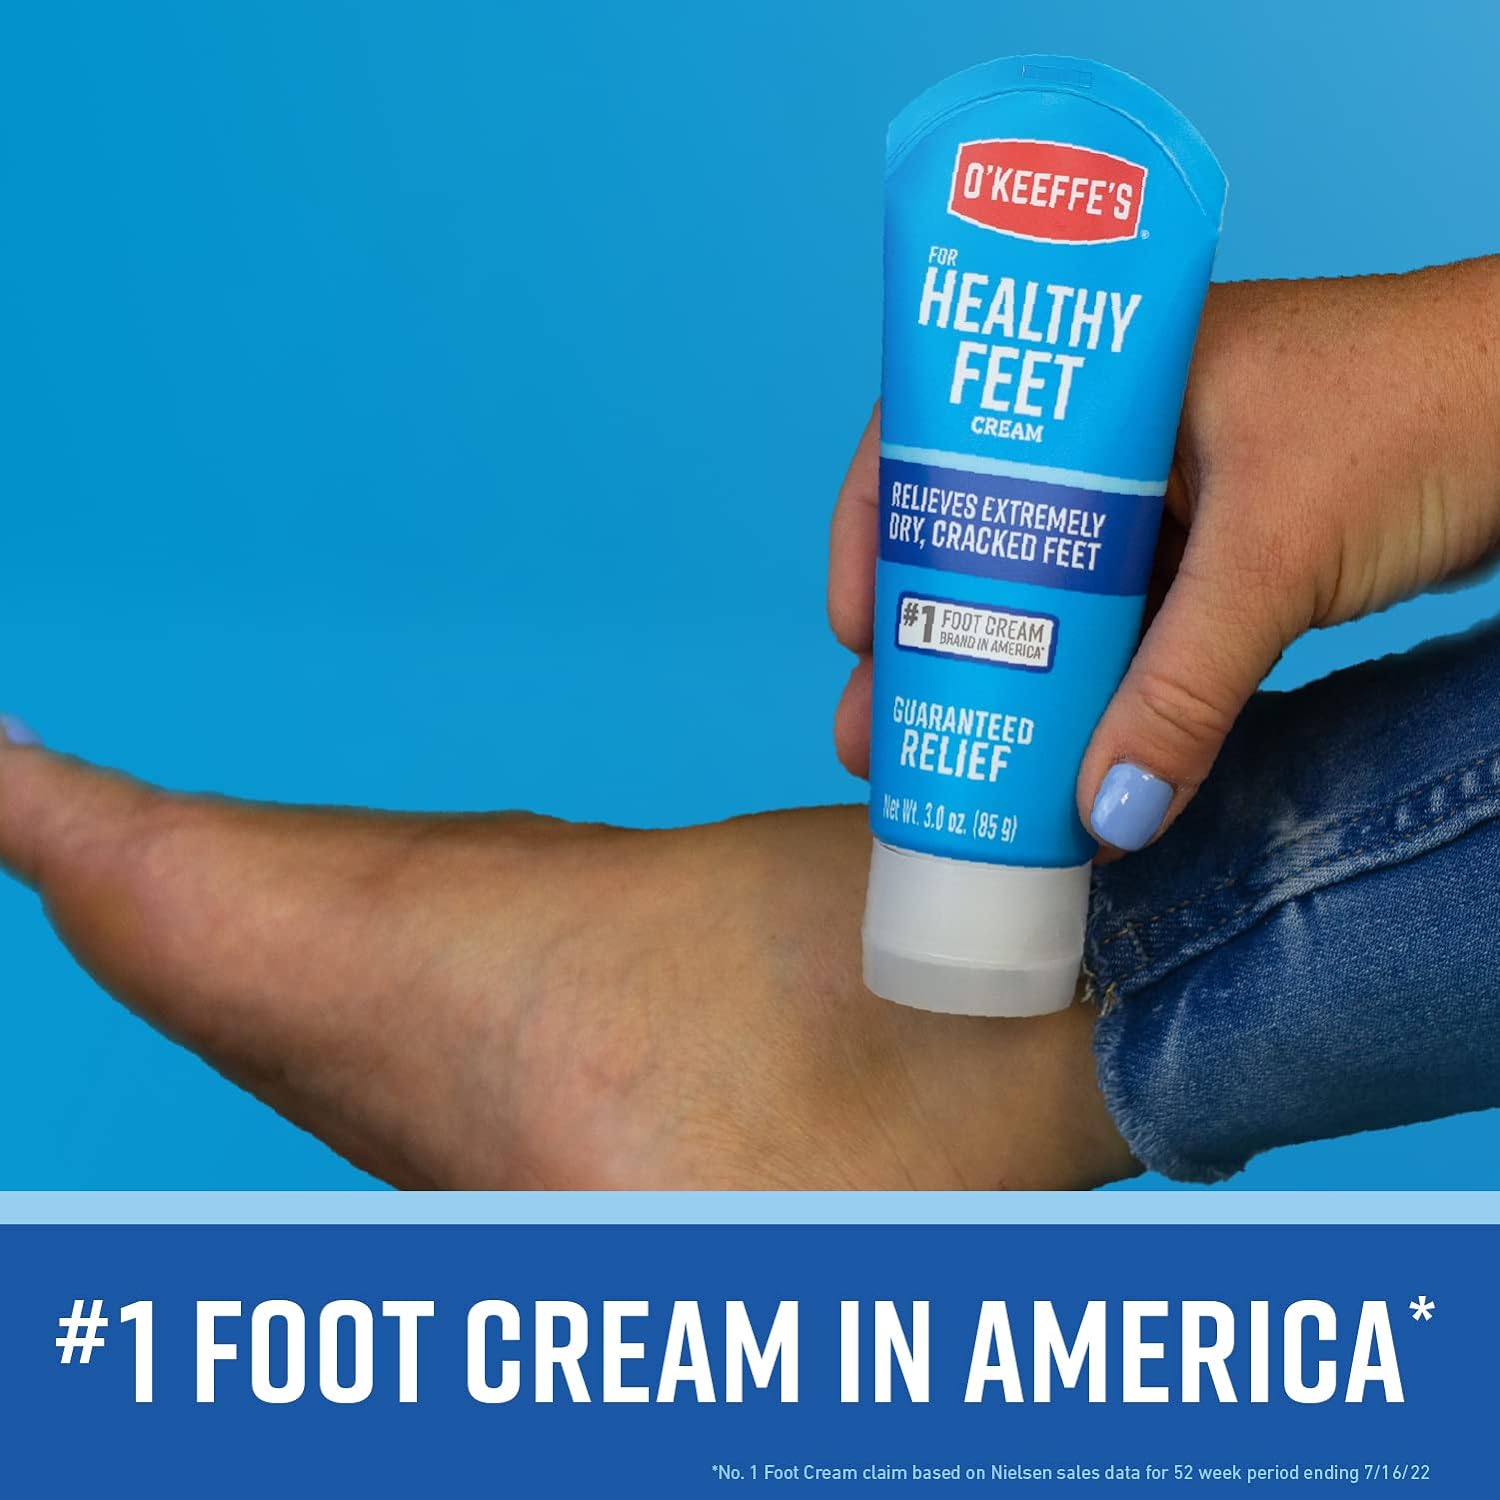 O'Keeffe's for Healthy Feet Foot Cream, Guaranteed Relief for Extremely Dry, Cracked Feet, Clinically Proven to Instantly Boost Moisture Levels, 3.0 Ounce Tube, (Pack of 1) : Beauty & Personal Care